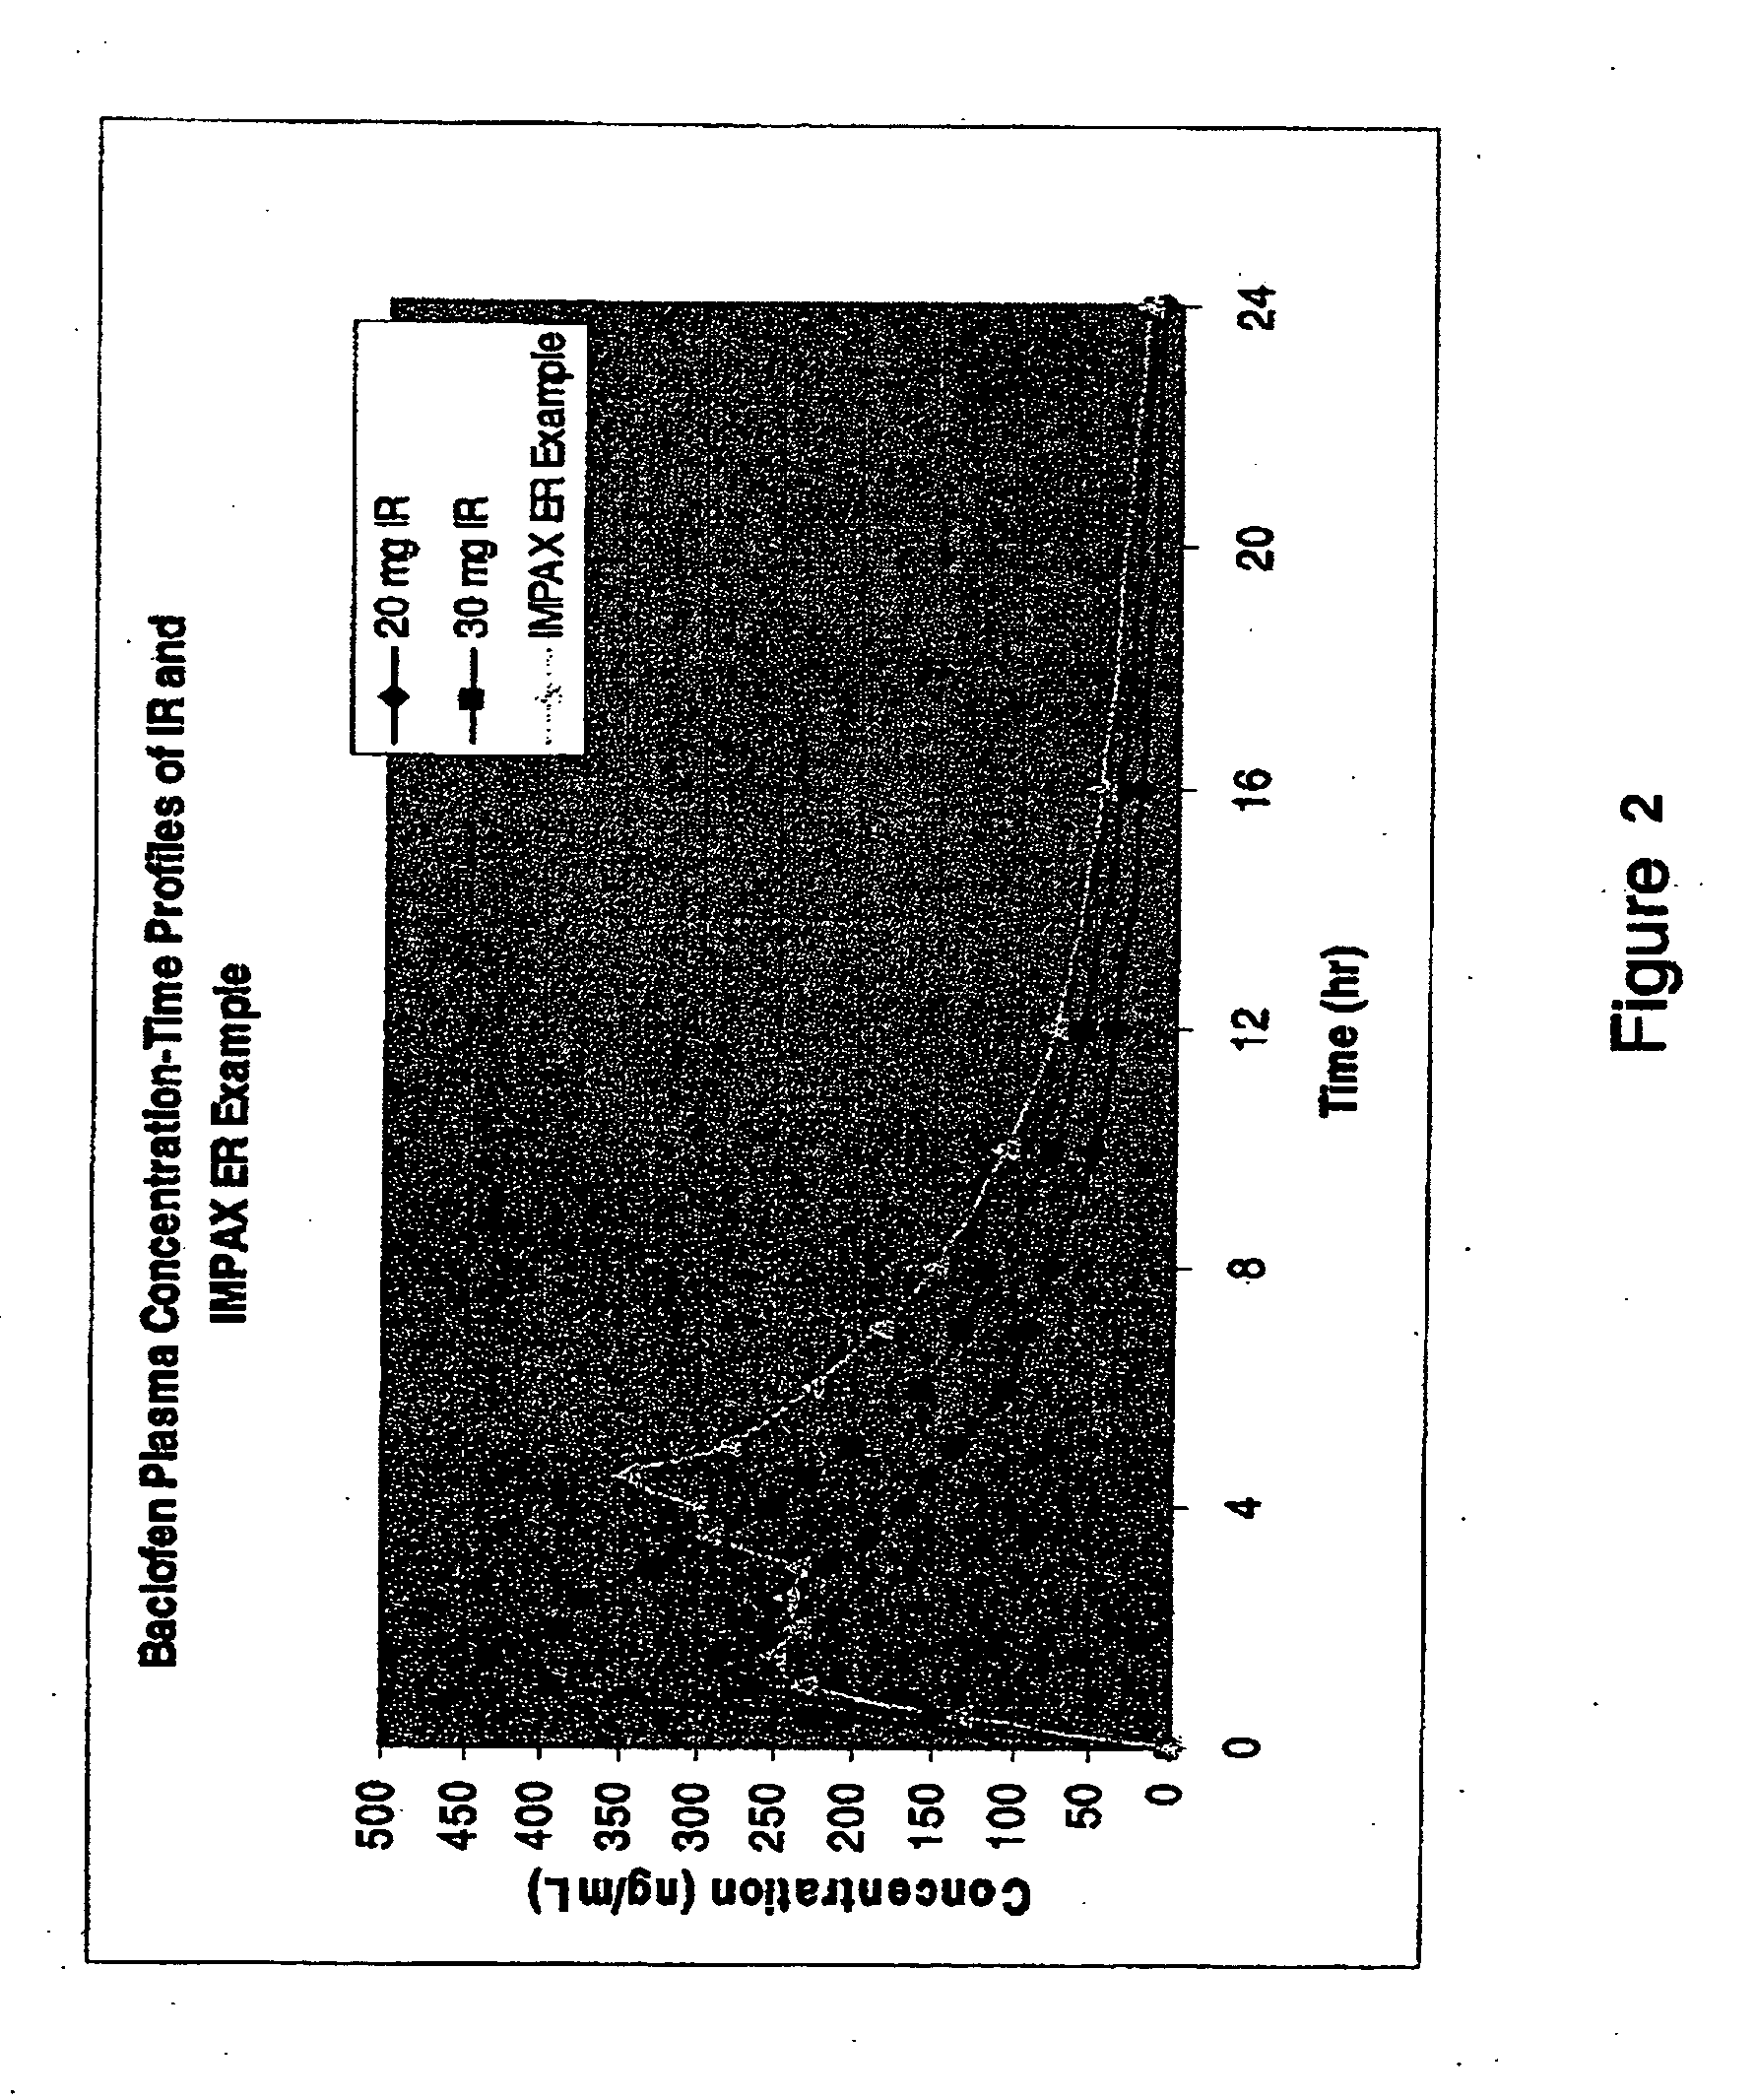 Pharmaceutical dosage forms having immediate release and/or controlled release properties